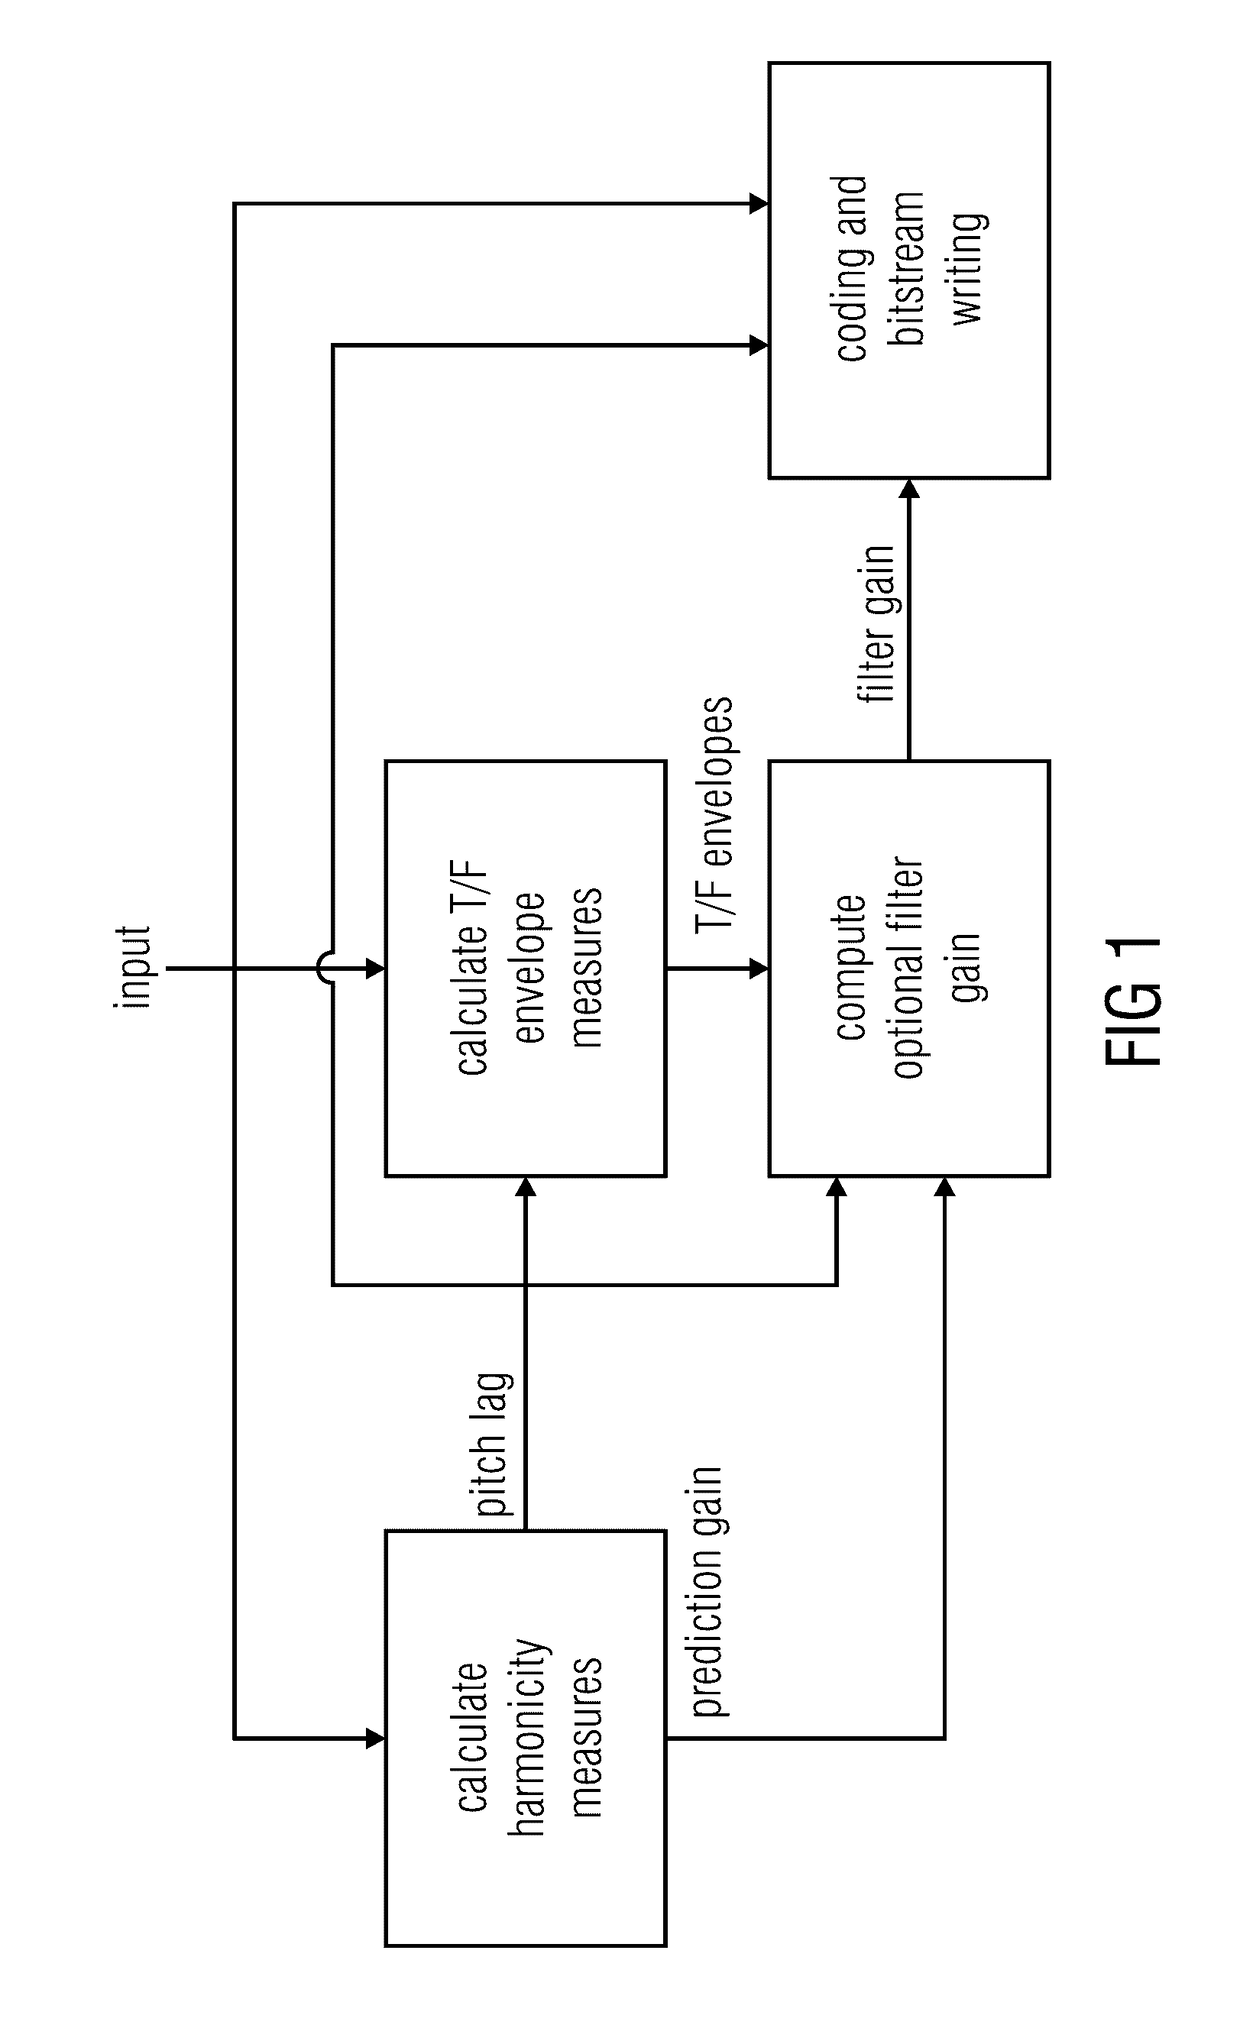 Harmonicity-dependent controlling of a harmonic filter tool